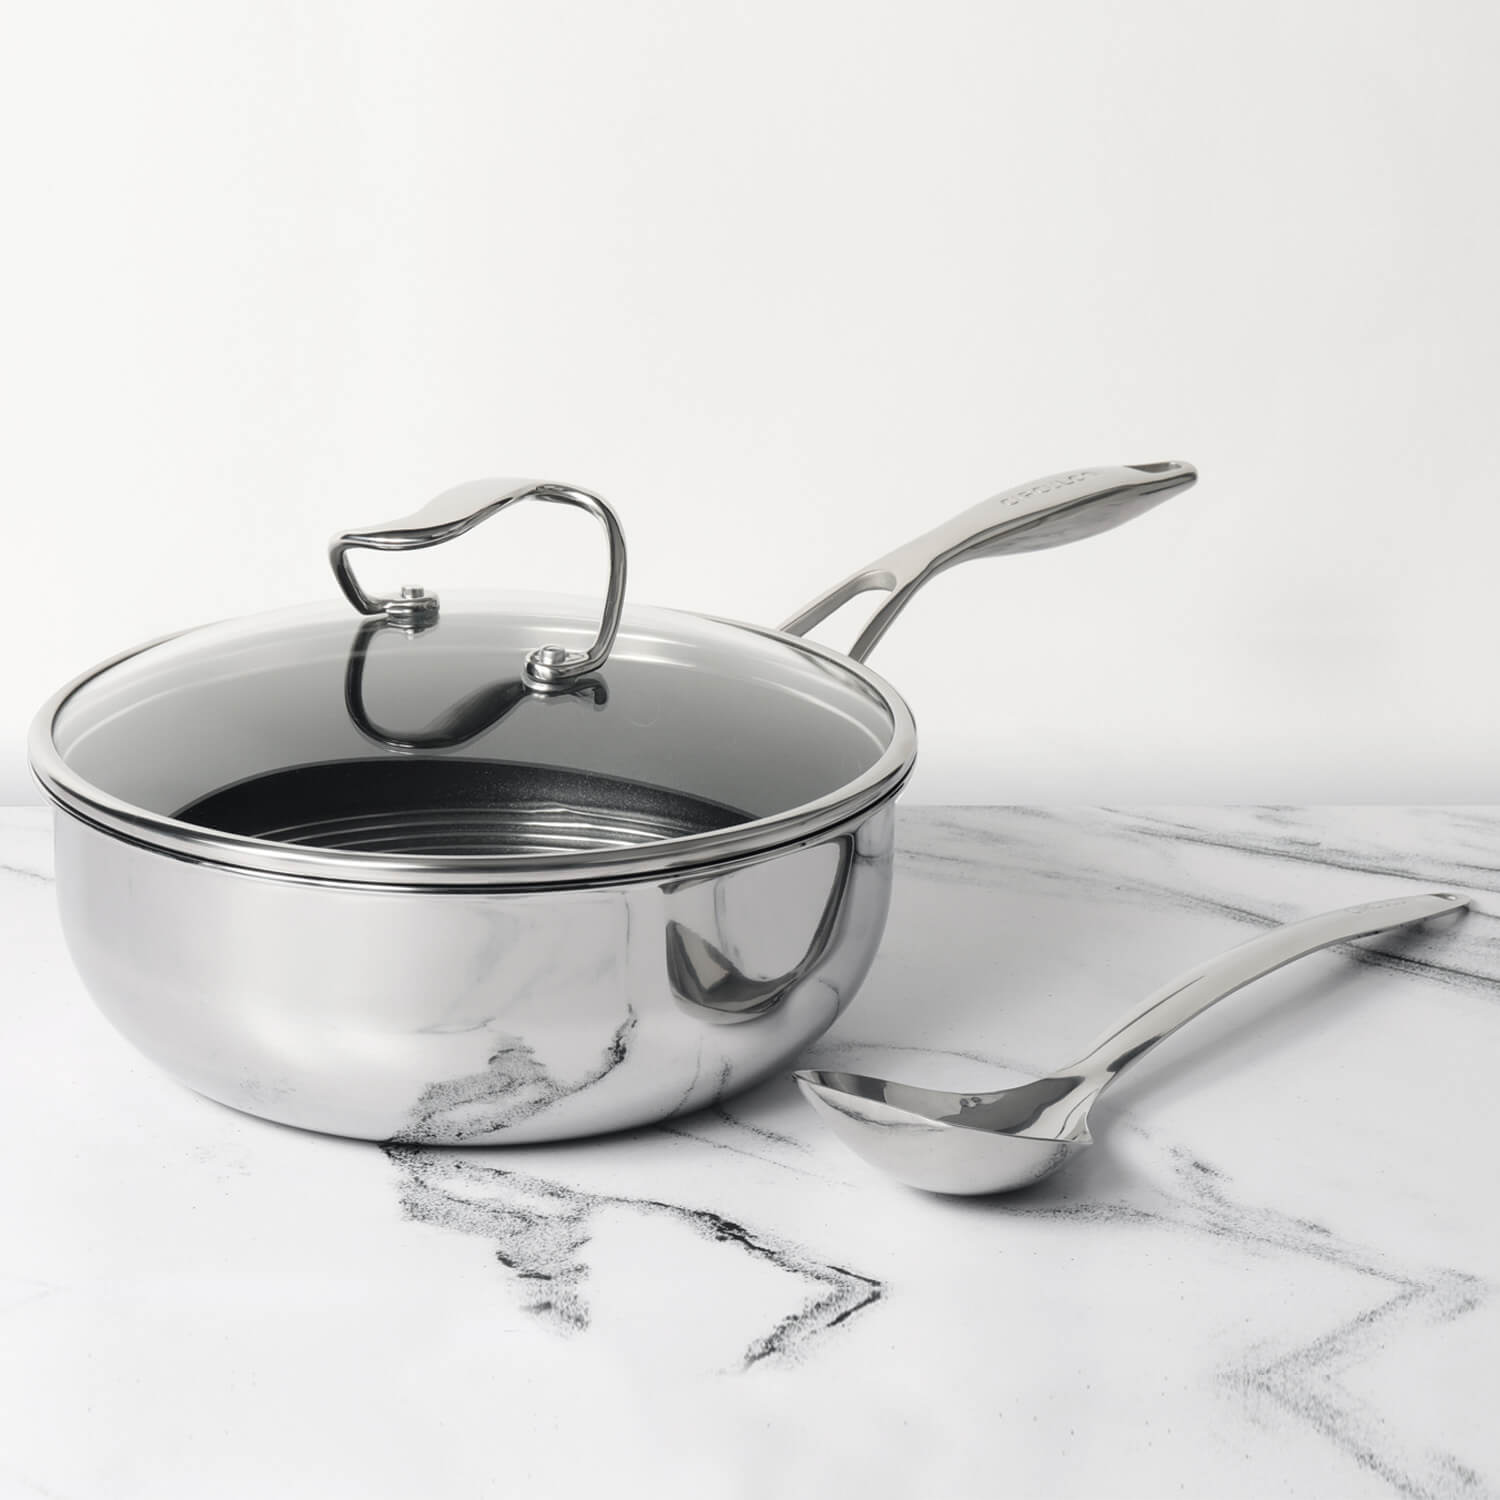 Circulon Stainless Steel Cookware Pots and Pans Set with SteelShield Hybrid  Stainless and Nonstick Technology